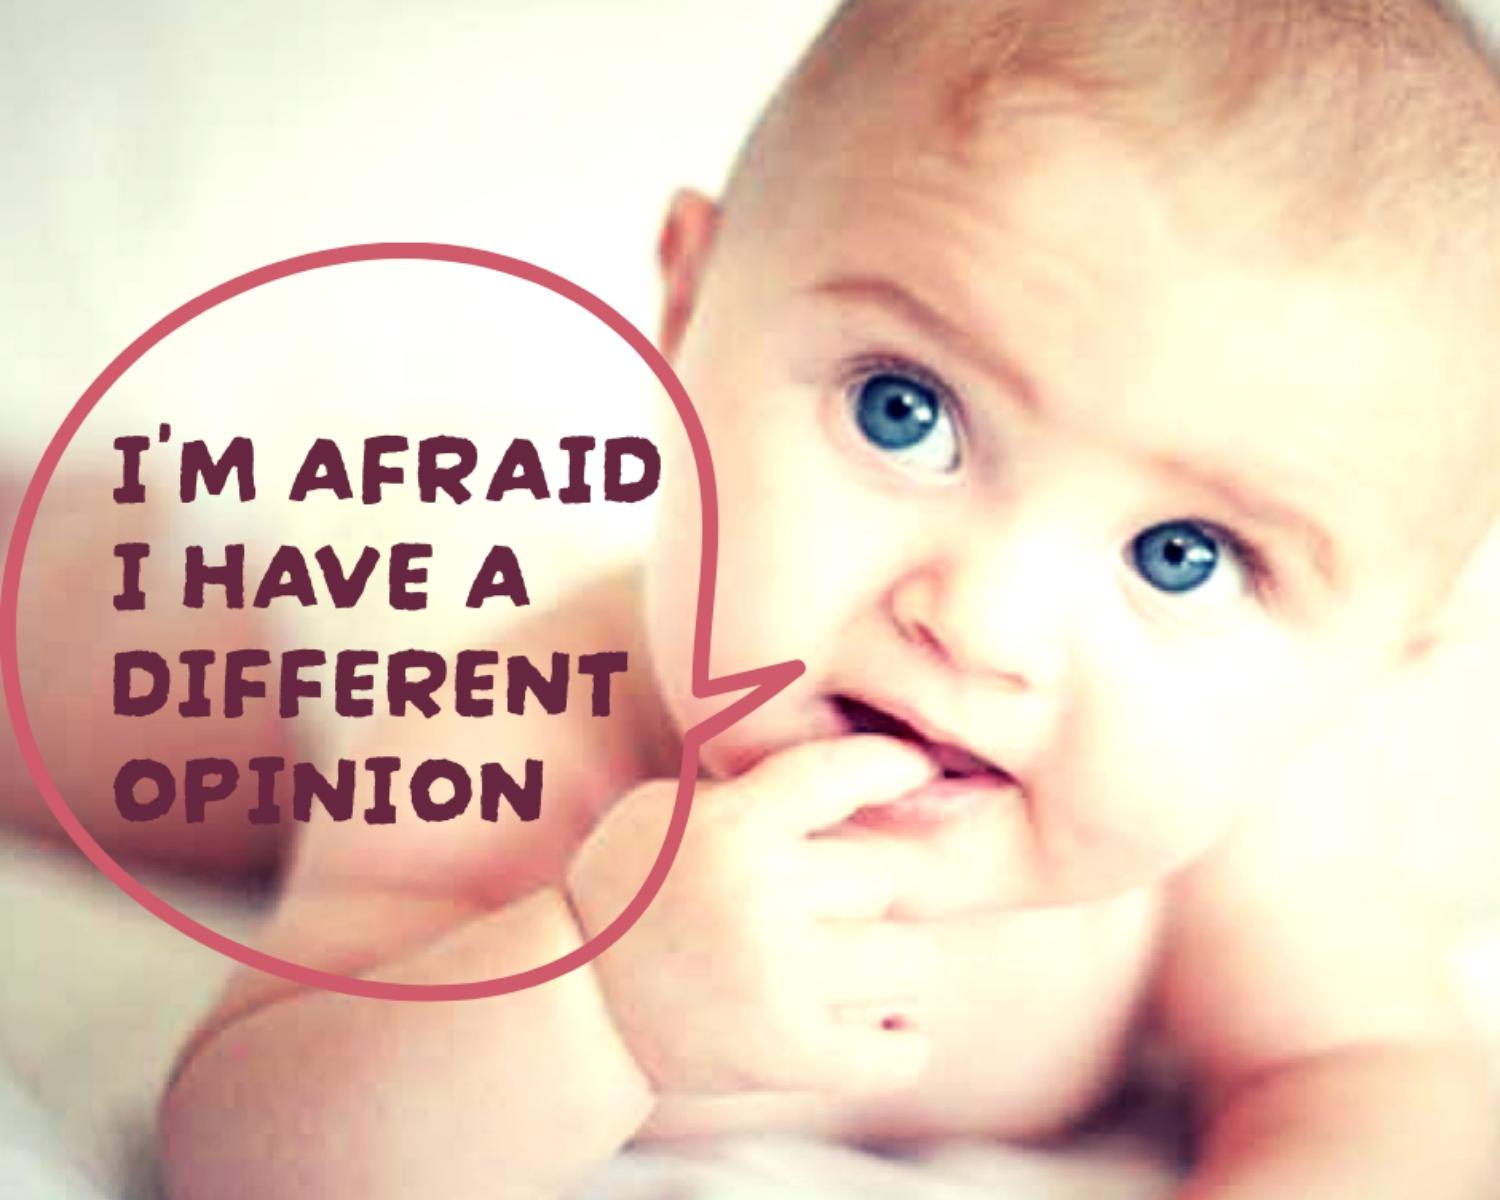 "I'm Afraid I Have A Different Opinion